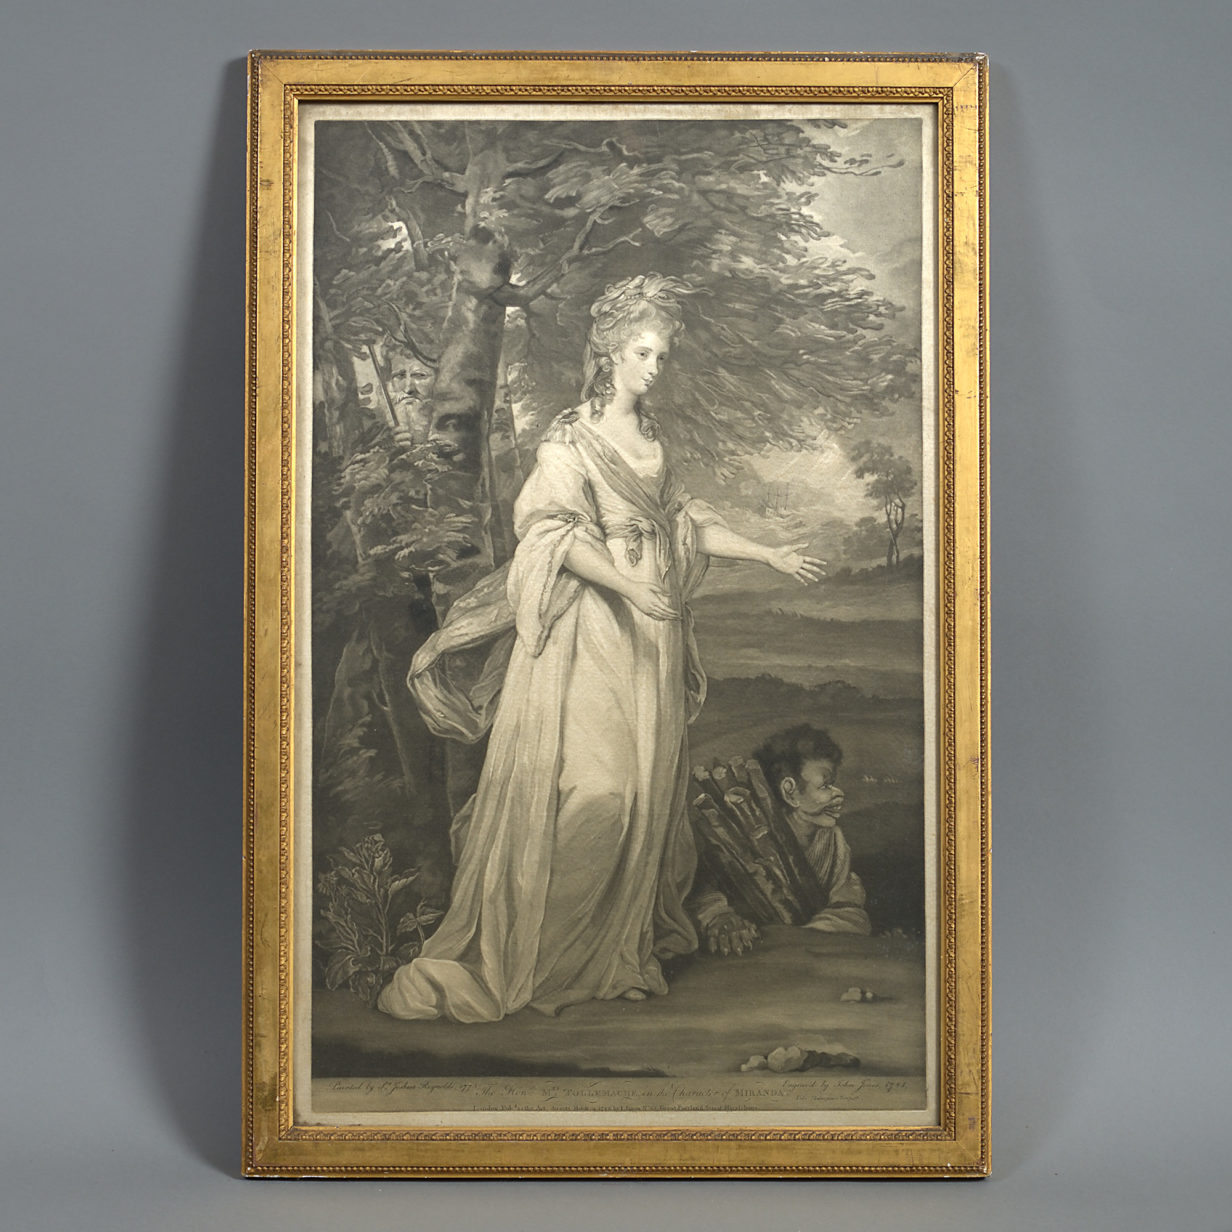 An 18th century engraving of the portrait of mrs tollemache by joshua reynolds